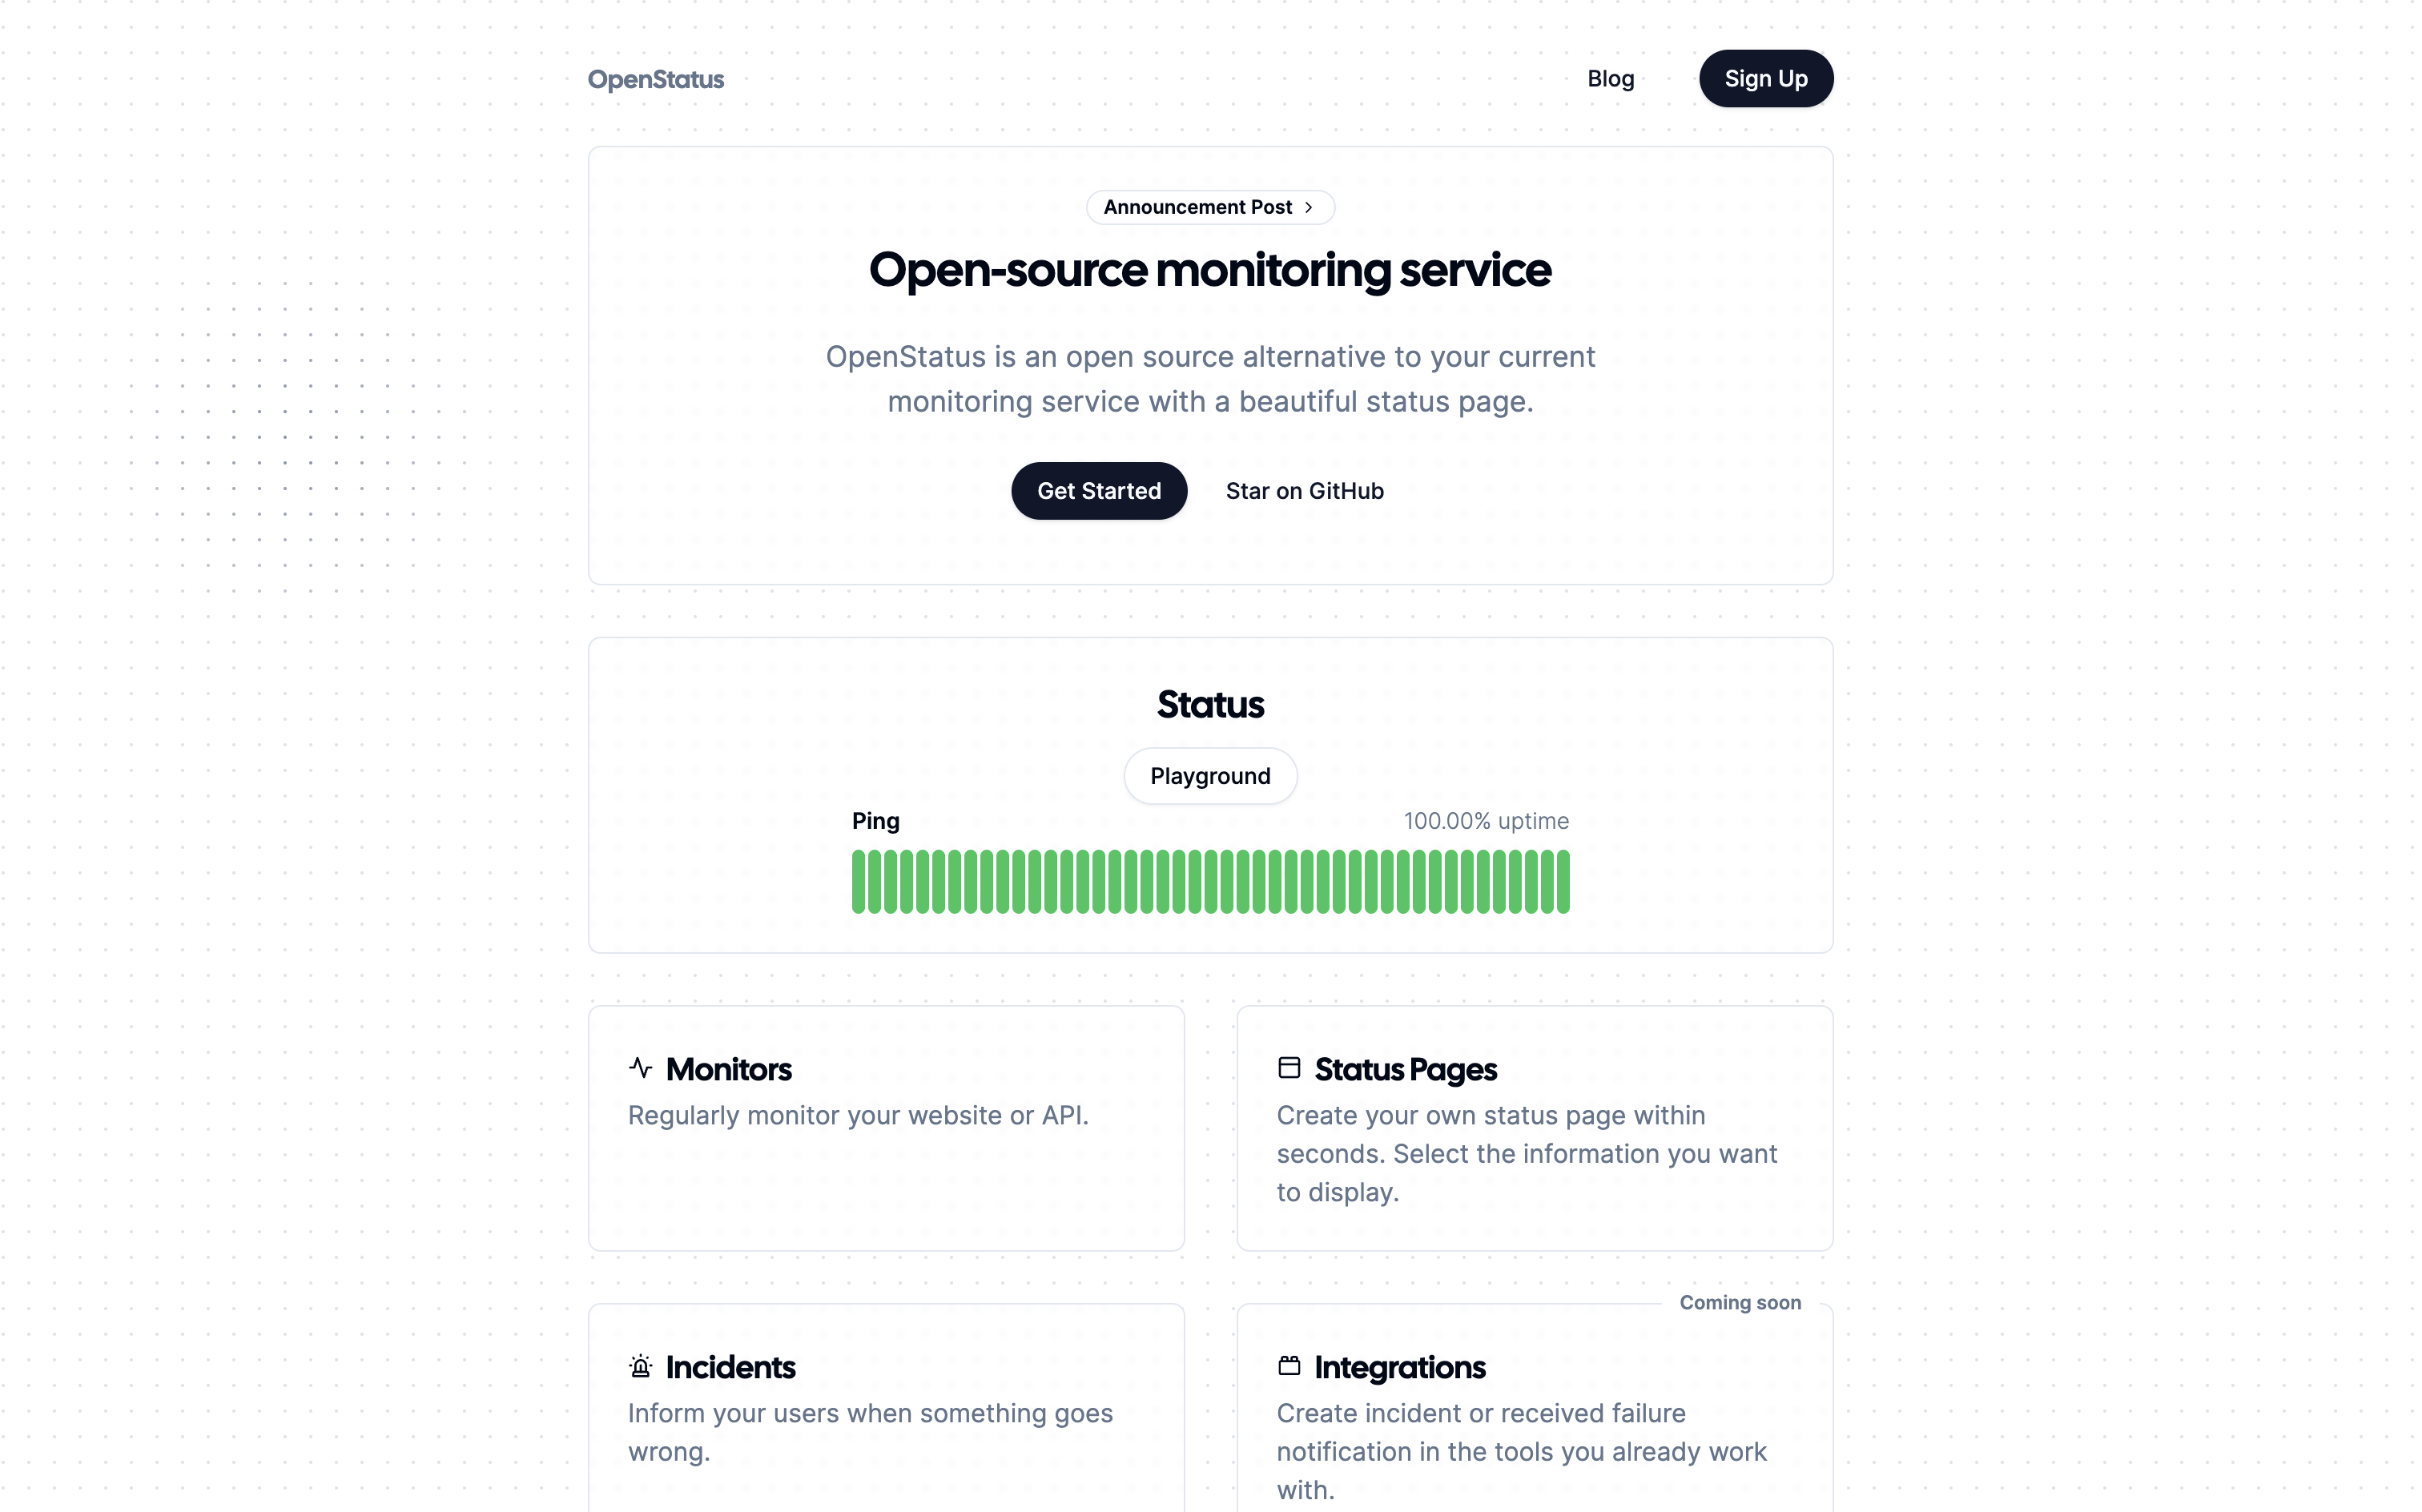 OpenStatus is an open source alternative to your current monitoring service with a beautiful status page.